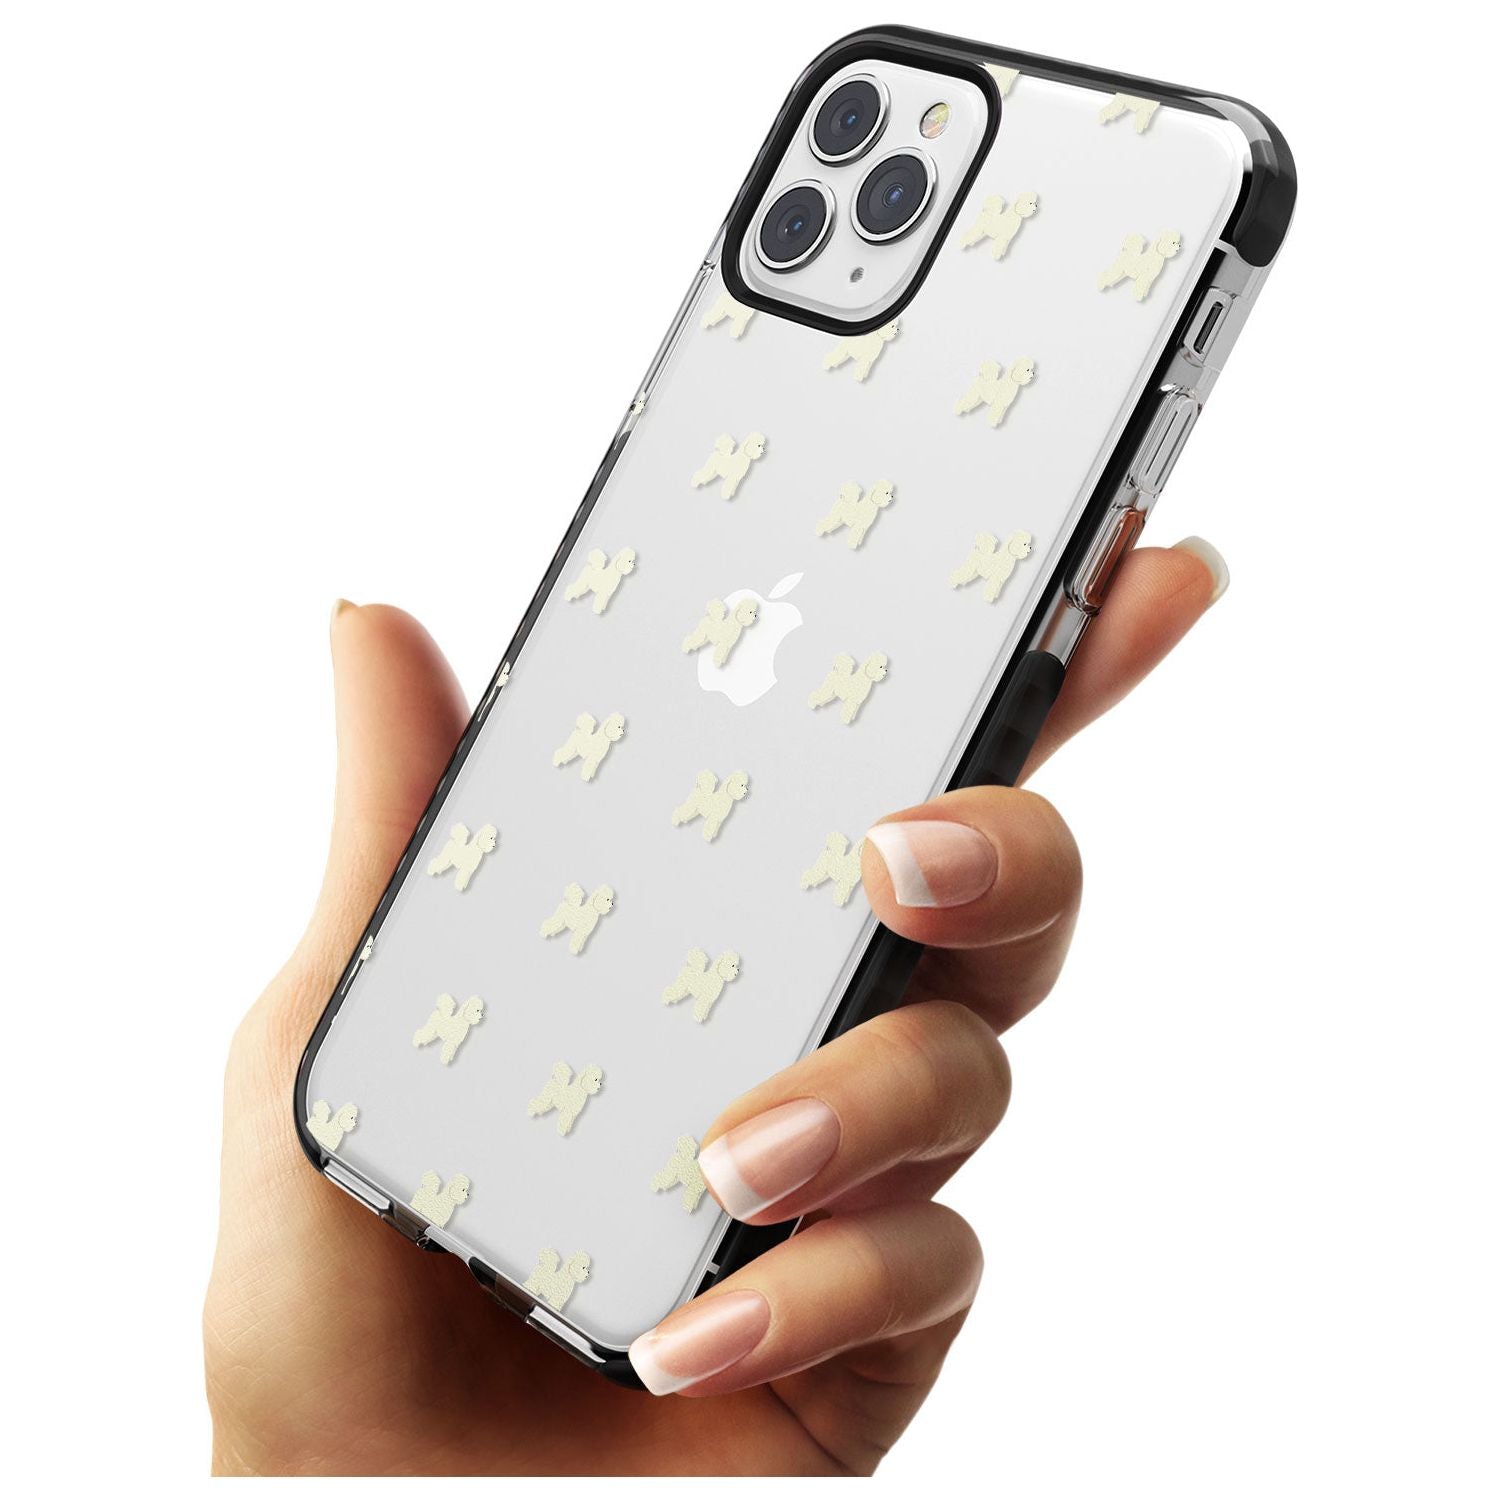 Bichon Frise Dog Pattern Clear Black Impact Phone Case for iPhone 11 Pro Max